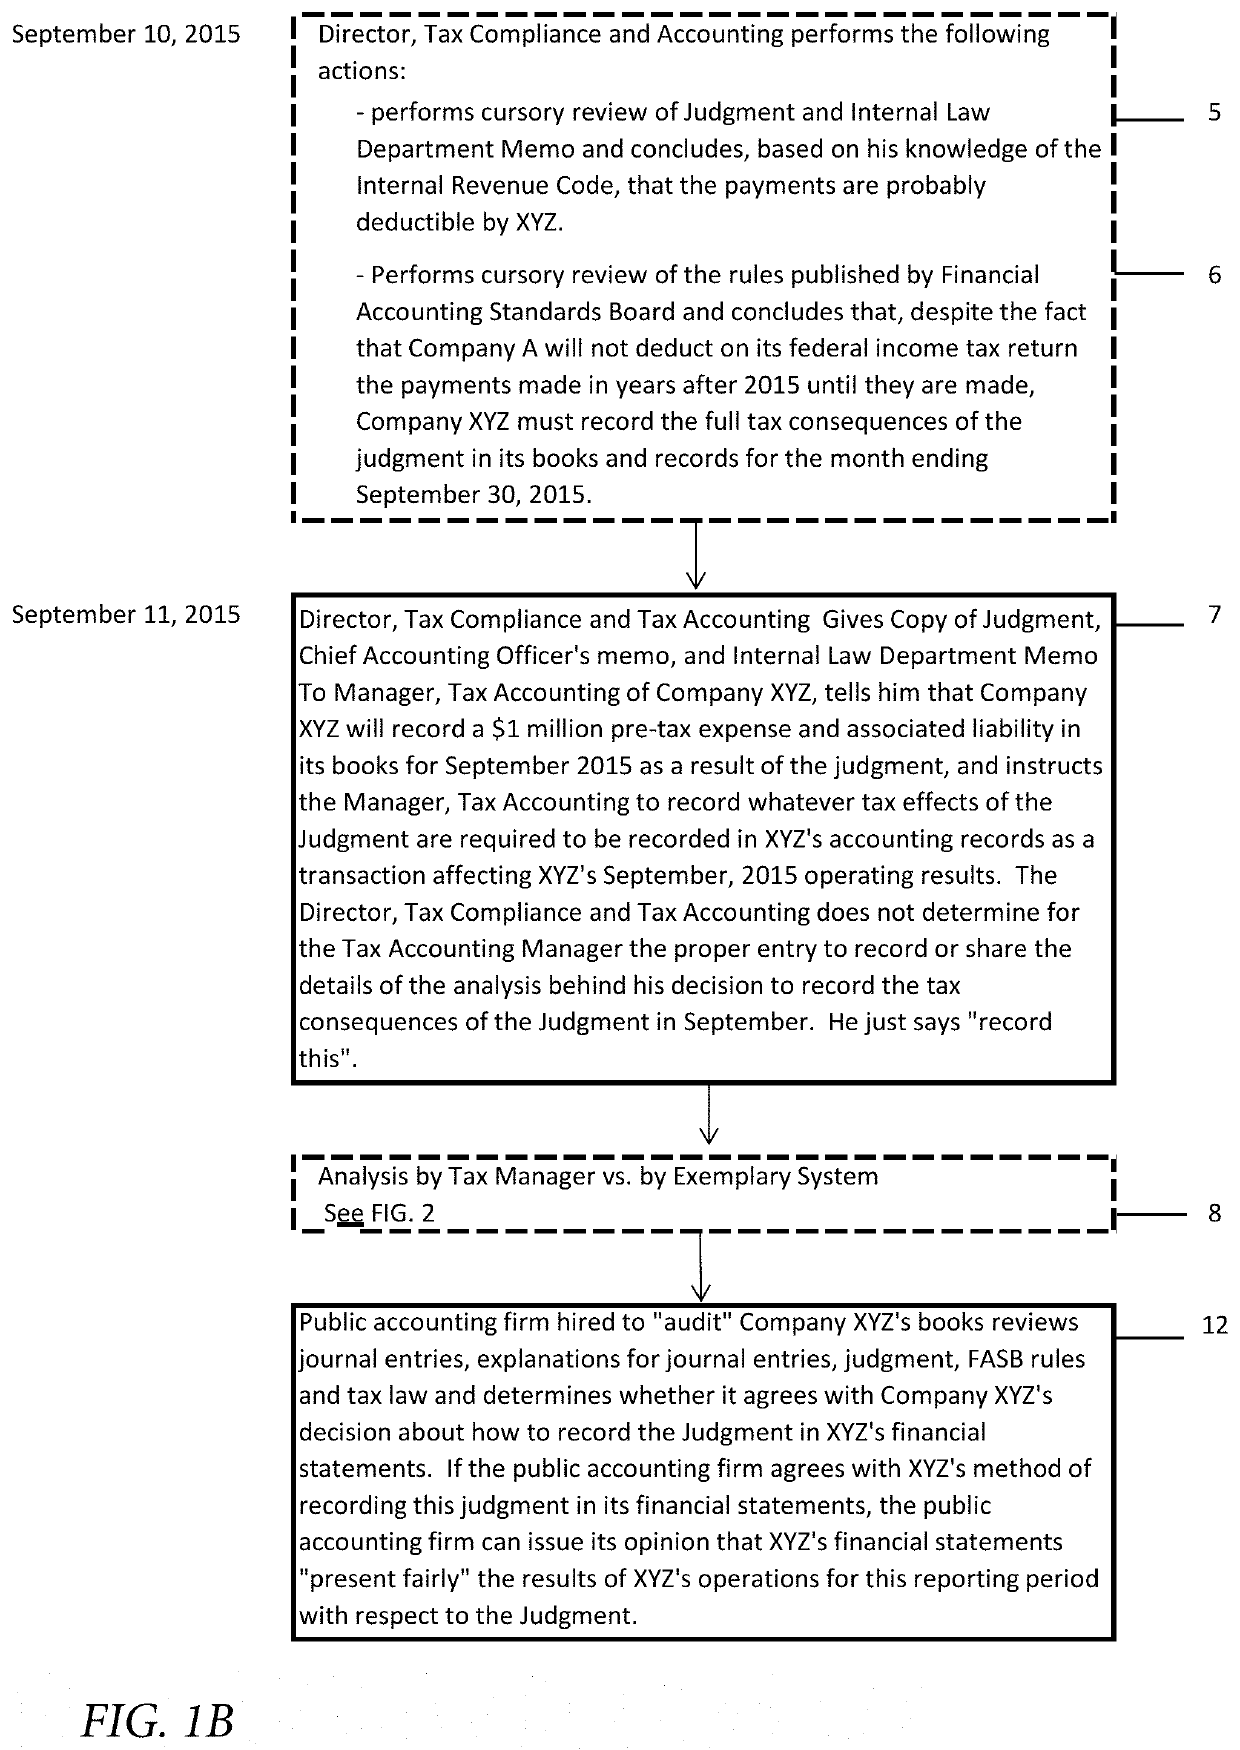 Determining correct answers to tax and accounting issues arising from business transactions and generating accounting entries to record those transactions using a computerized logic implementation